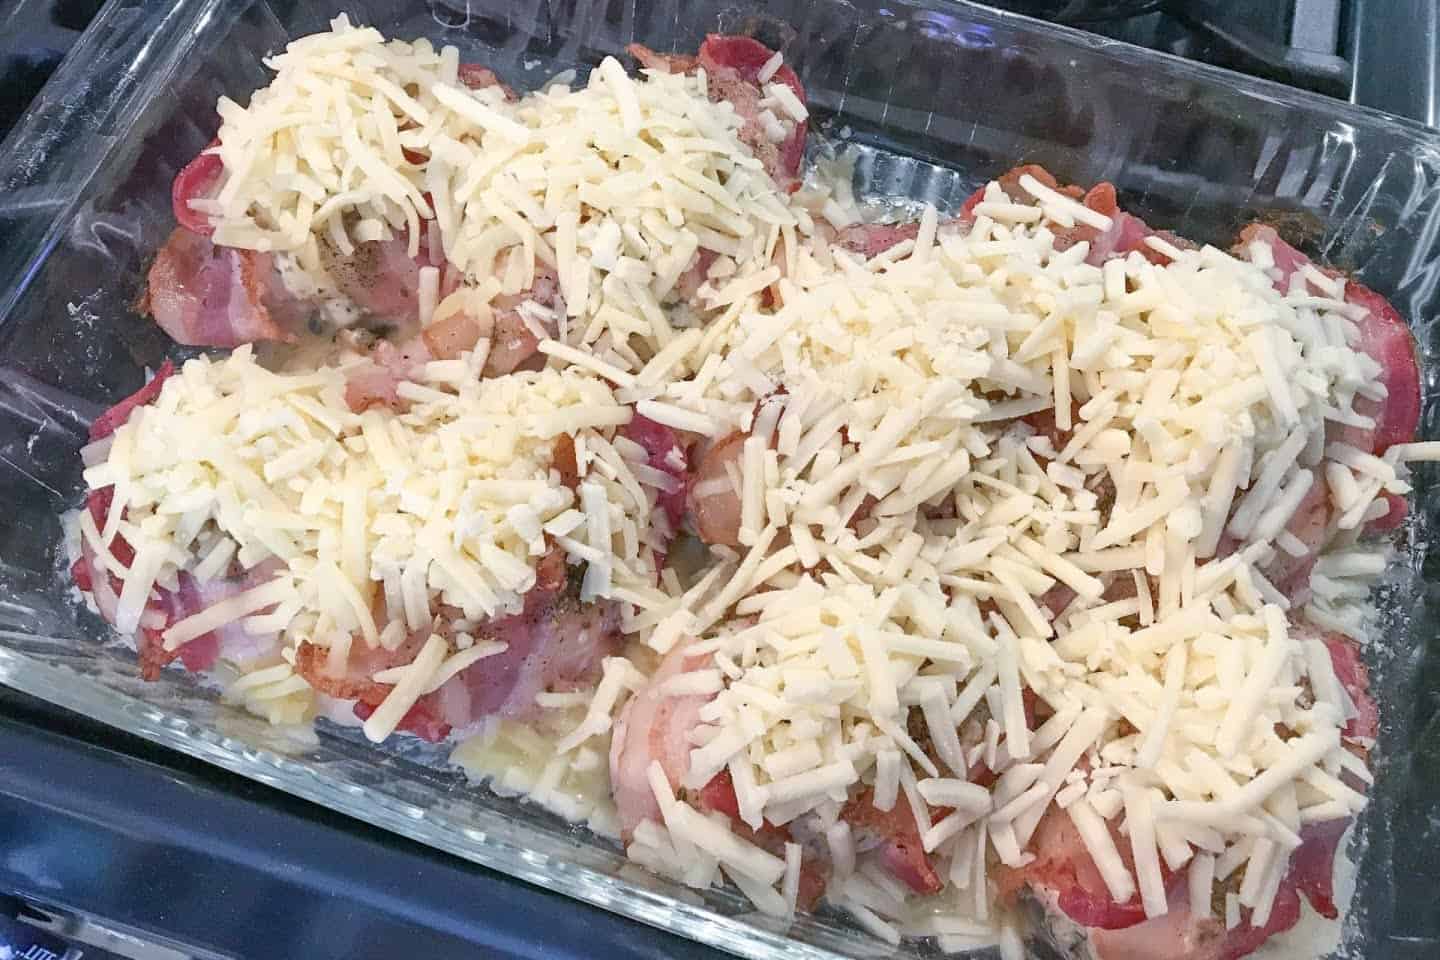 Baked Chicken with Cheese on Top